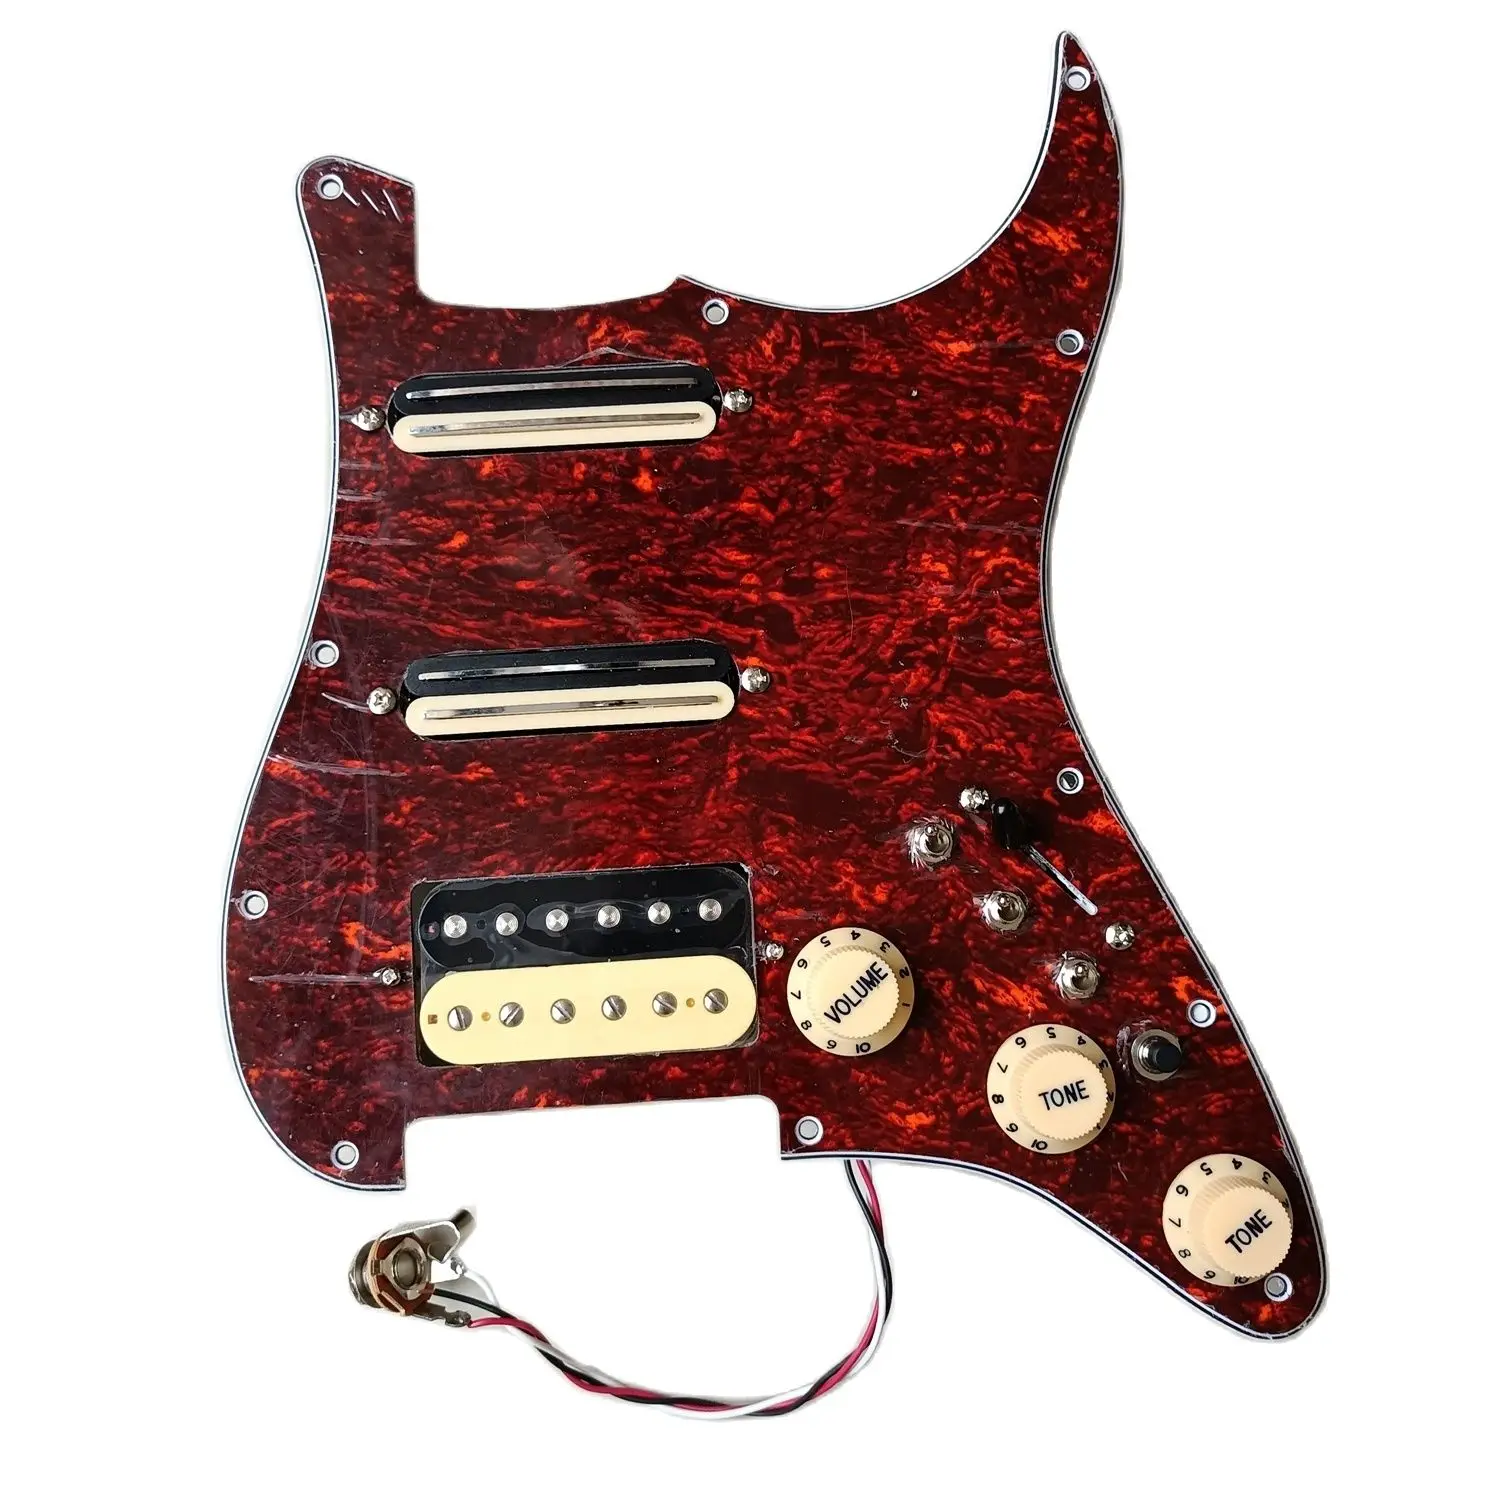 

SSH Prewired Loaded Strat Pickguard Multifunction 7 Way Switch Dual Hot Rail High Output Zebra Pickups For Fender Guitar